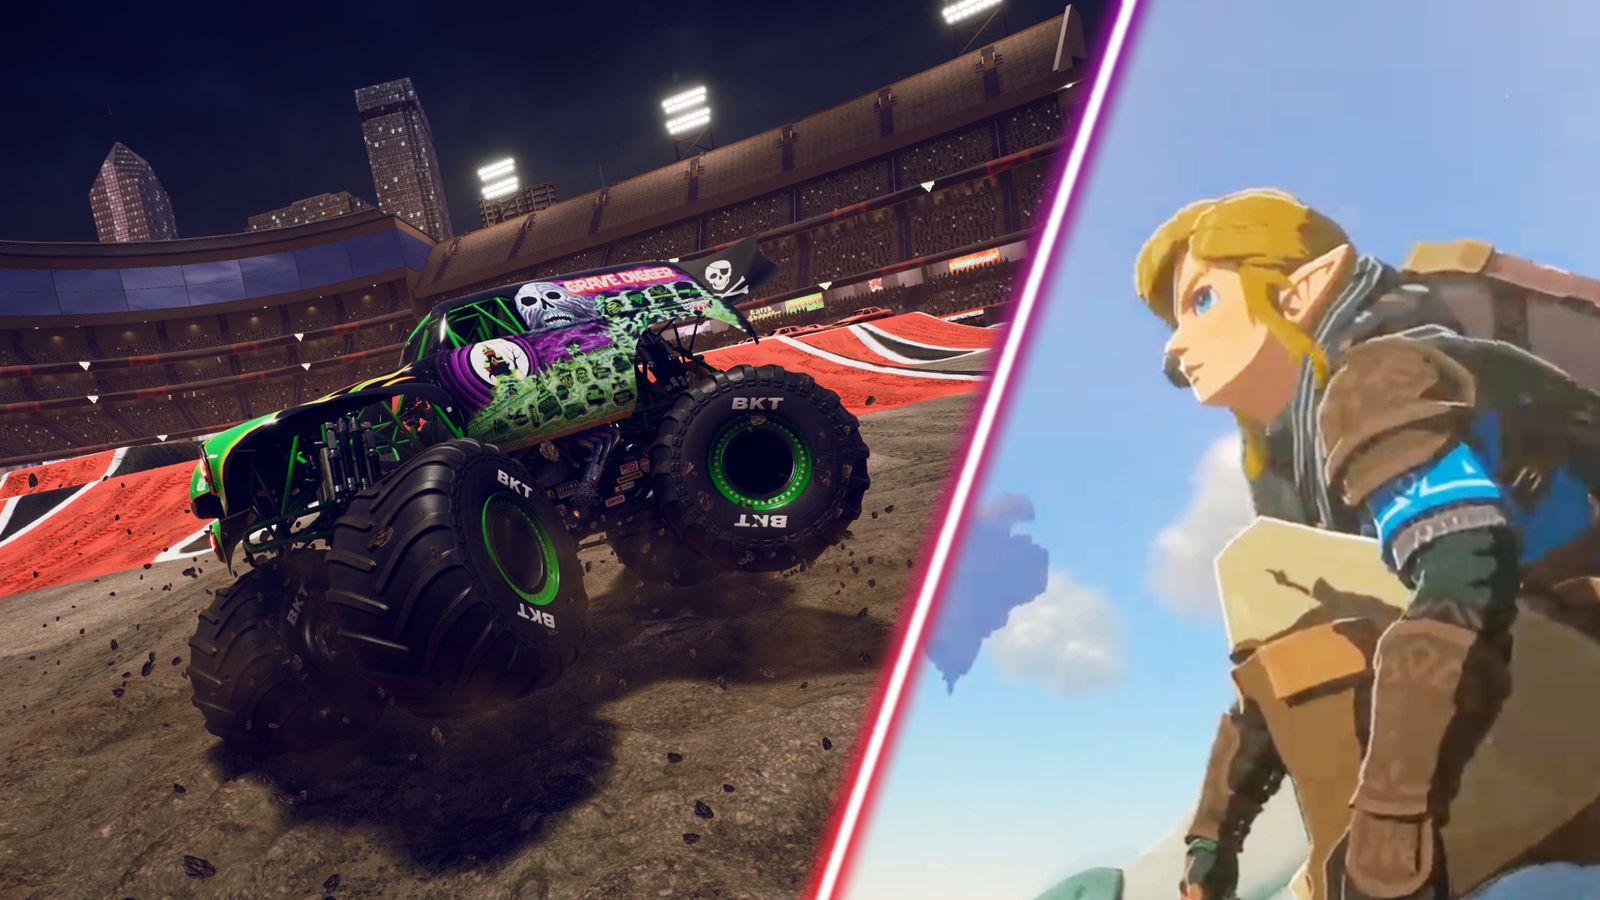 The Legend of Zelda: Tears of the Kingdom's Link next to a monster truck.